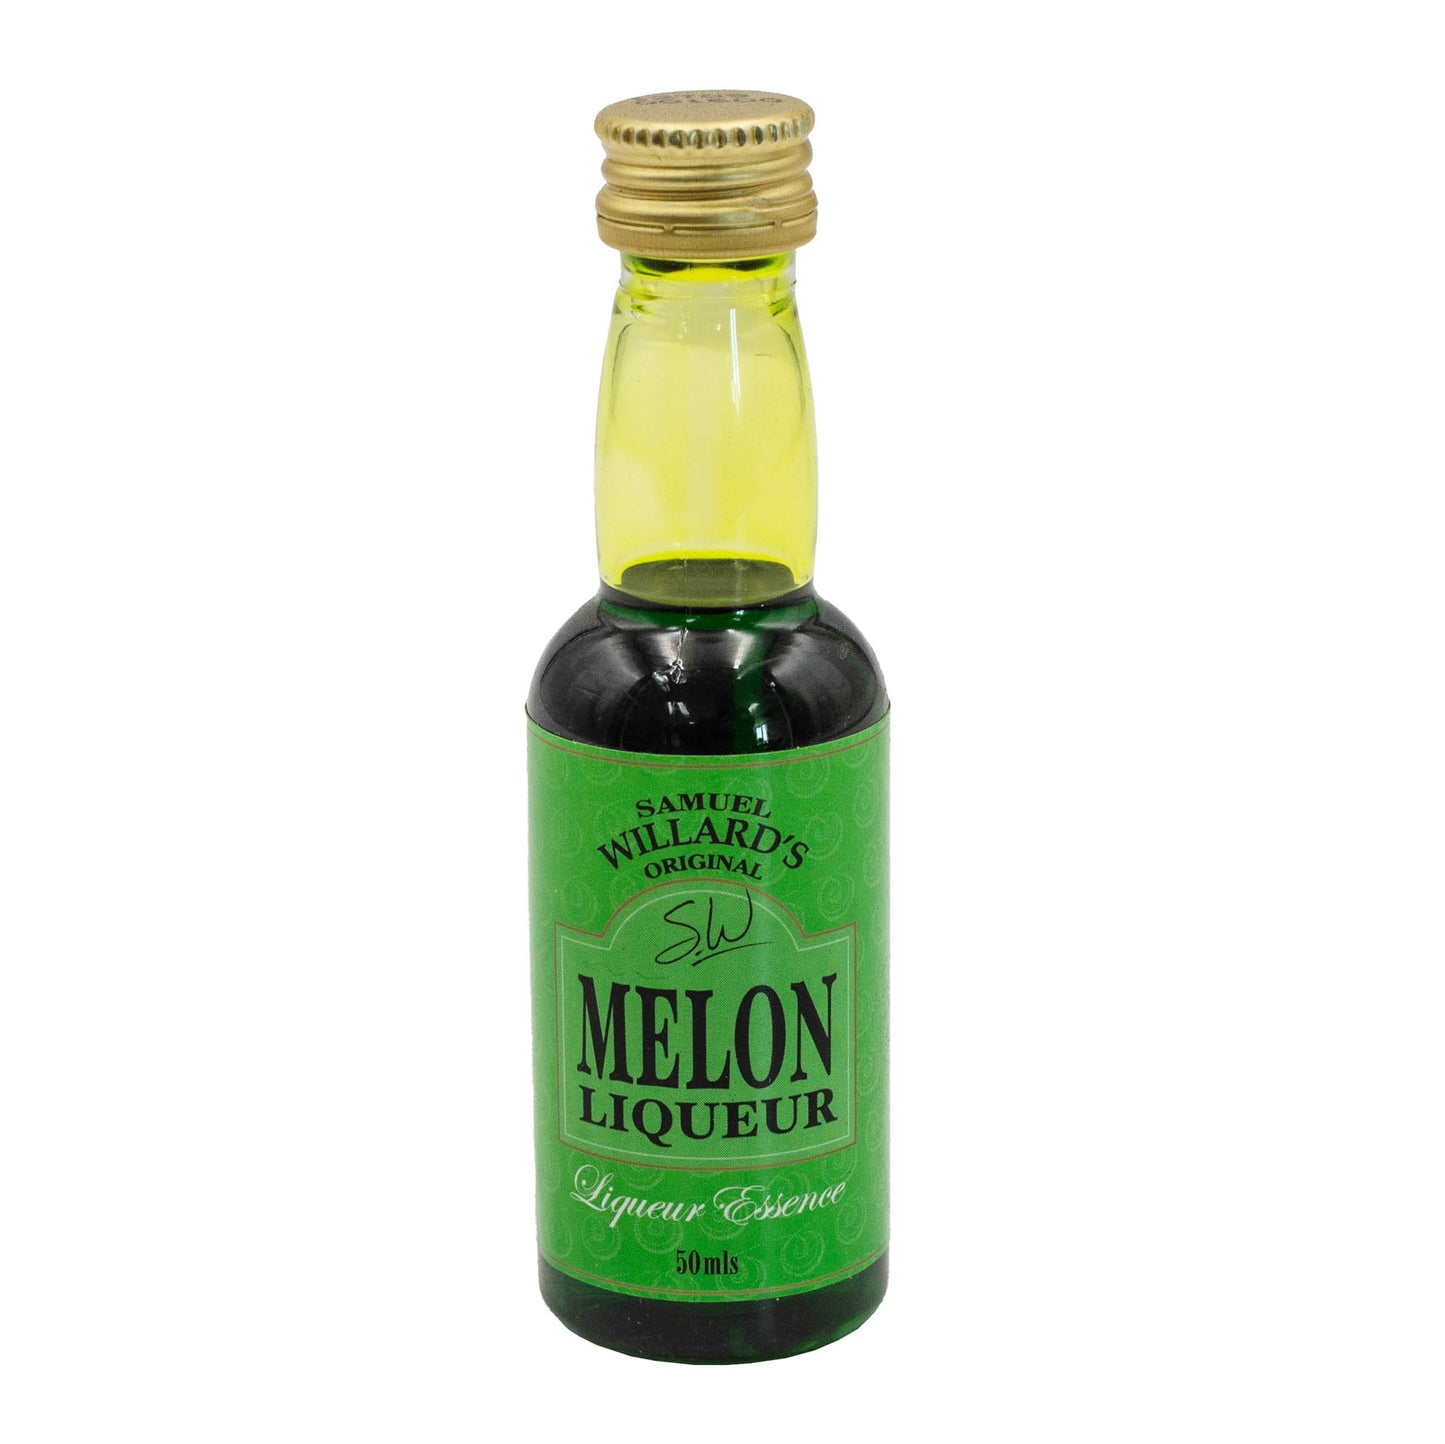 Samuel Willards Melon Liqueur essence makes a Midori style drink. Will make 1125ml of finished product from each 375ml bottle